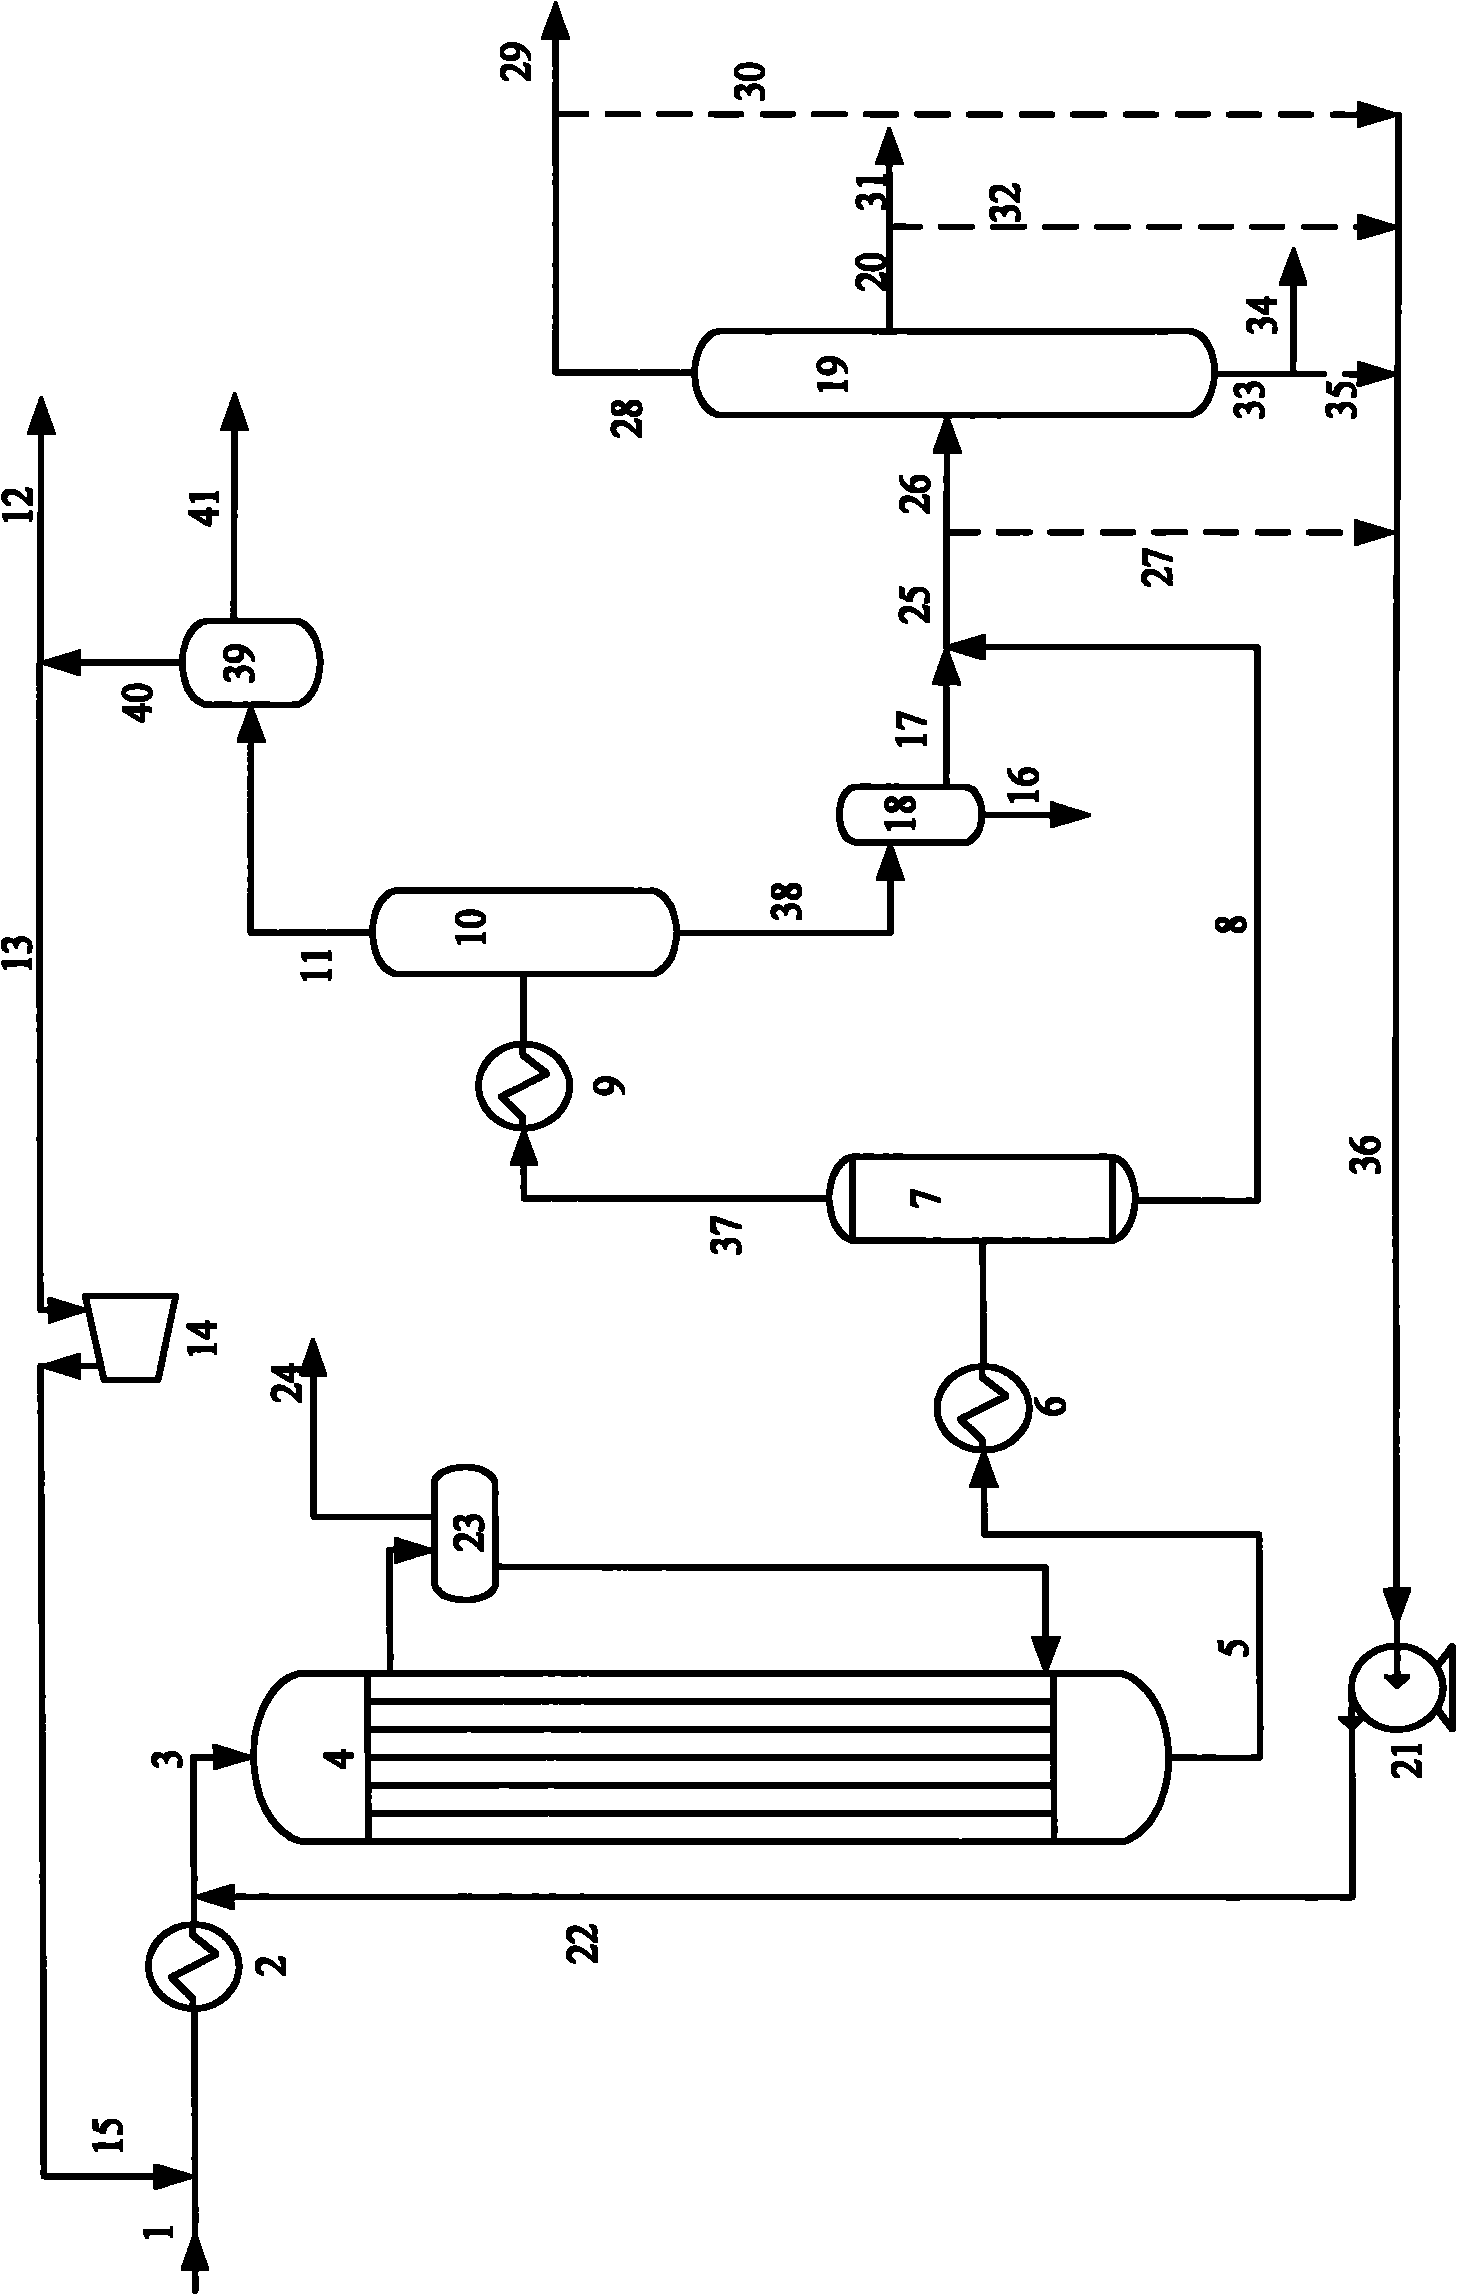 Tropsch synthesis method of fixed bed